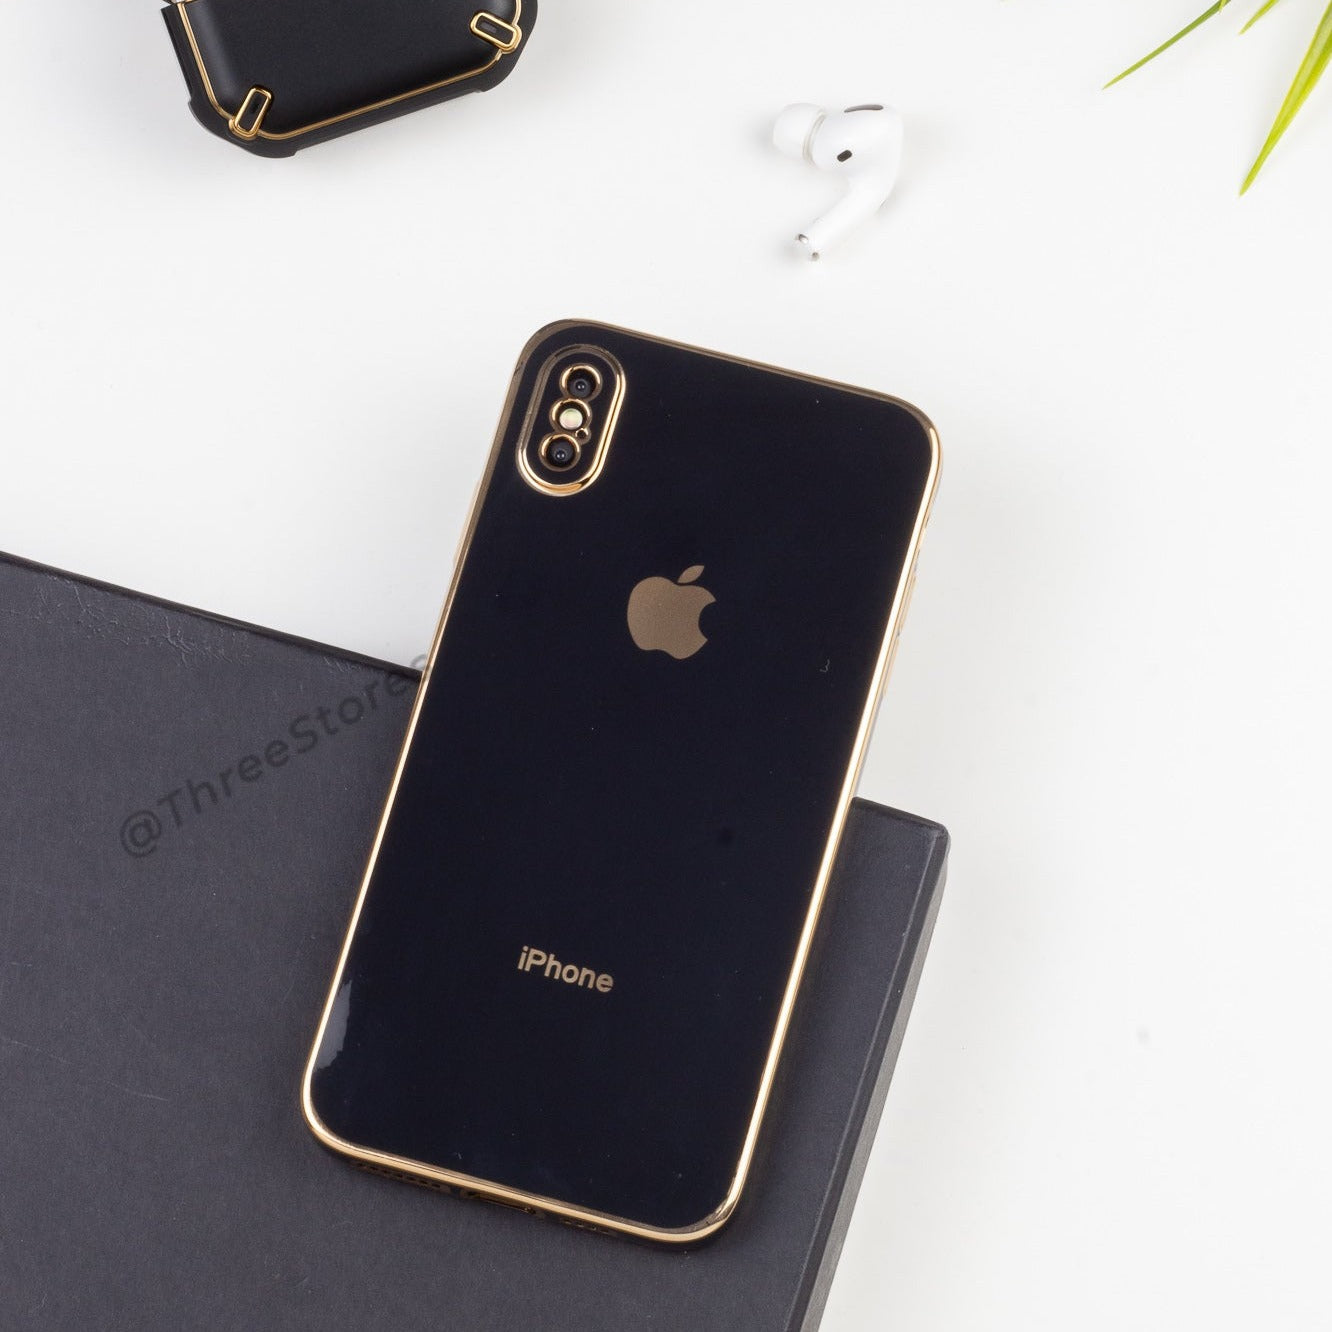 Plating Gold Lens Protection Case iPhone X Max Three store